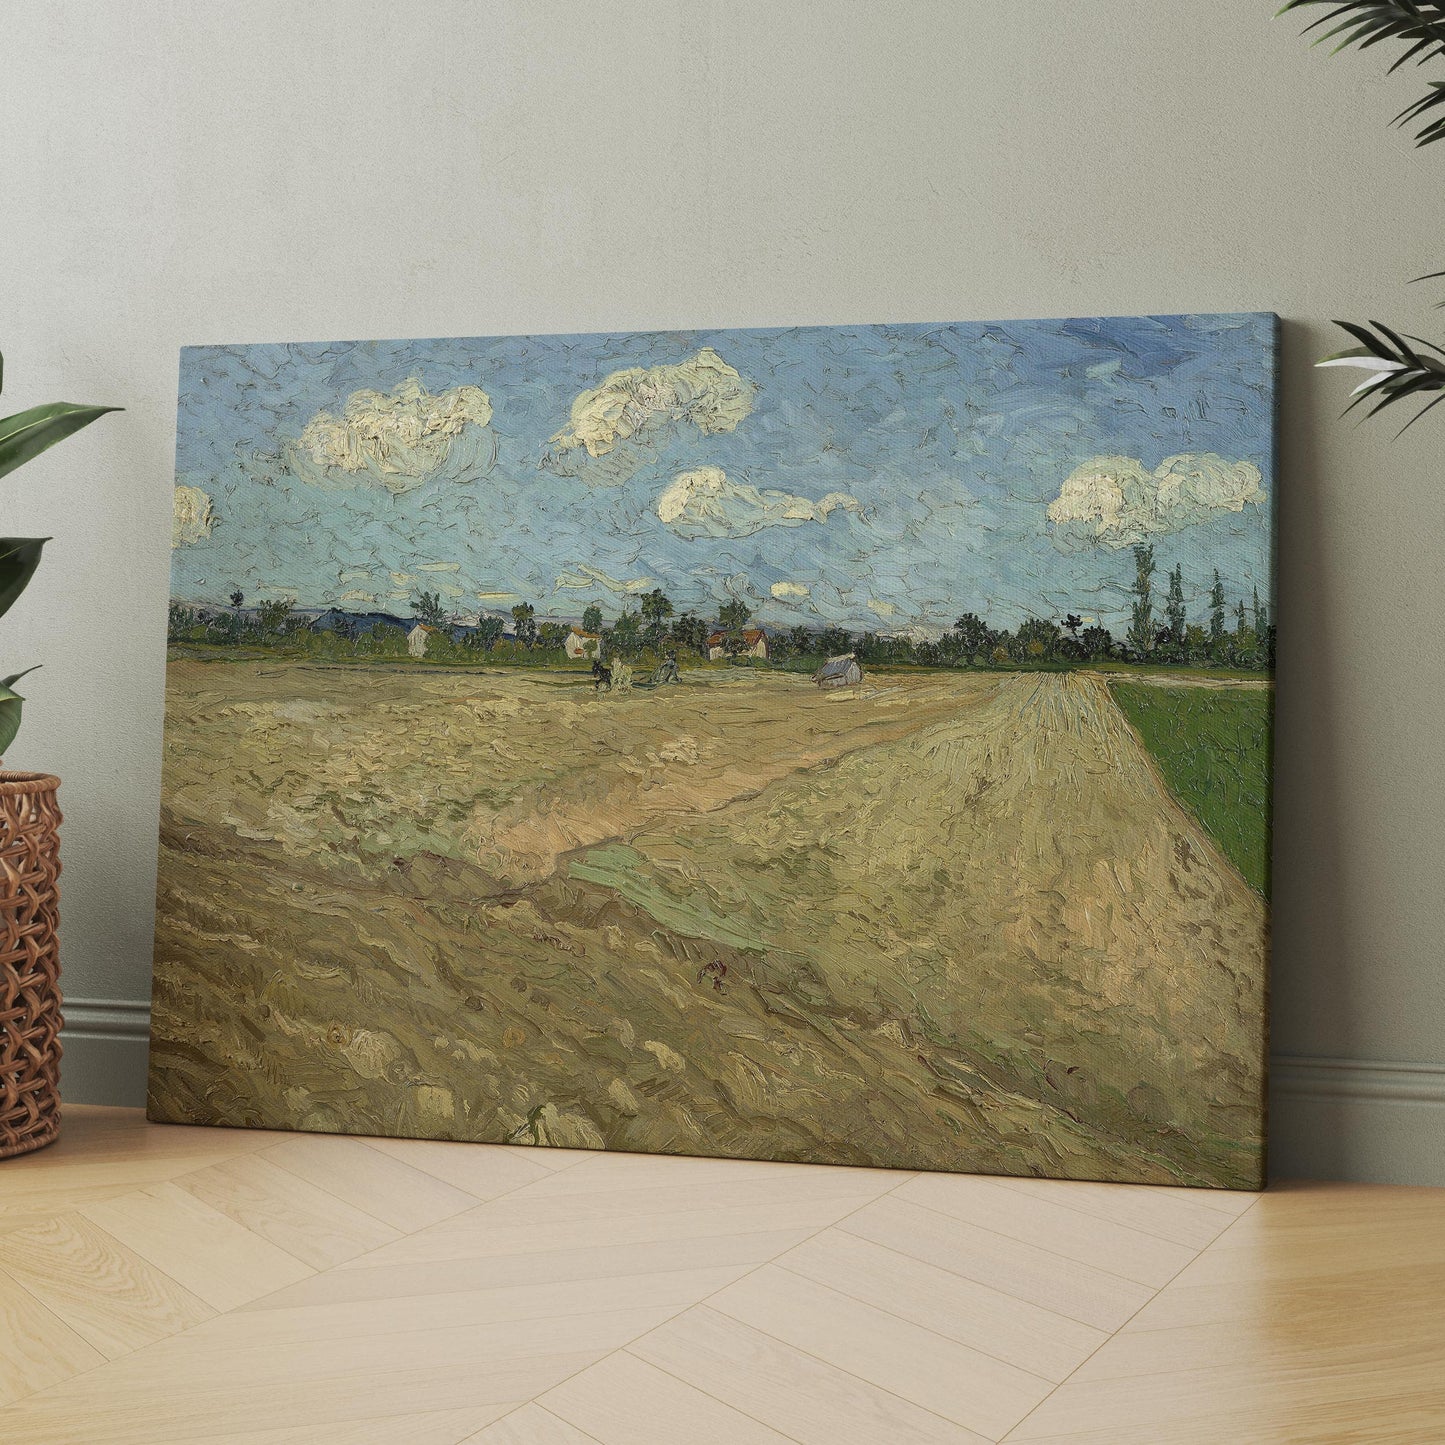 Ploughed Fields (1888) by Van Gogh